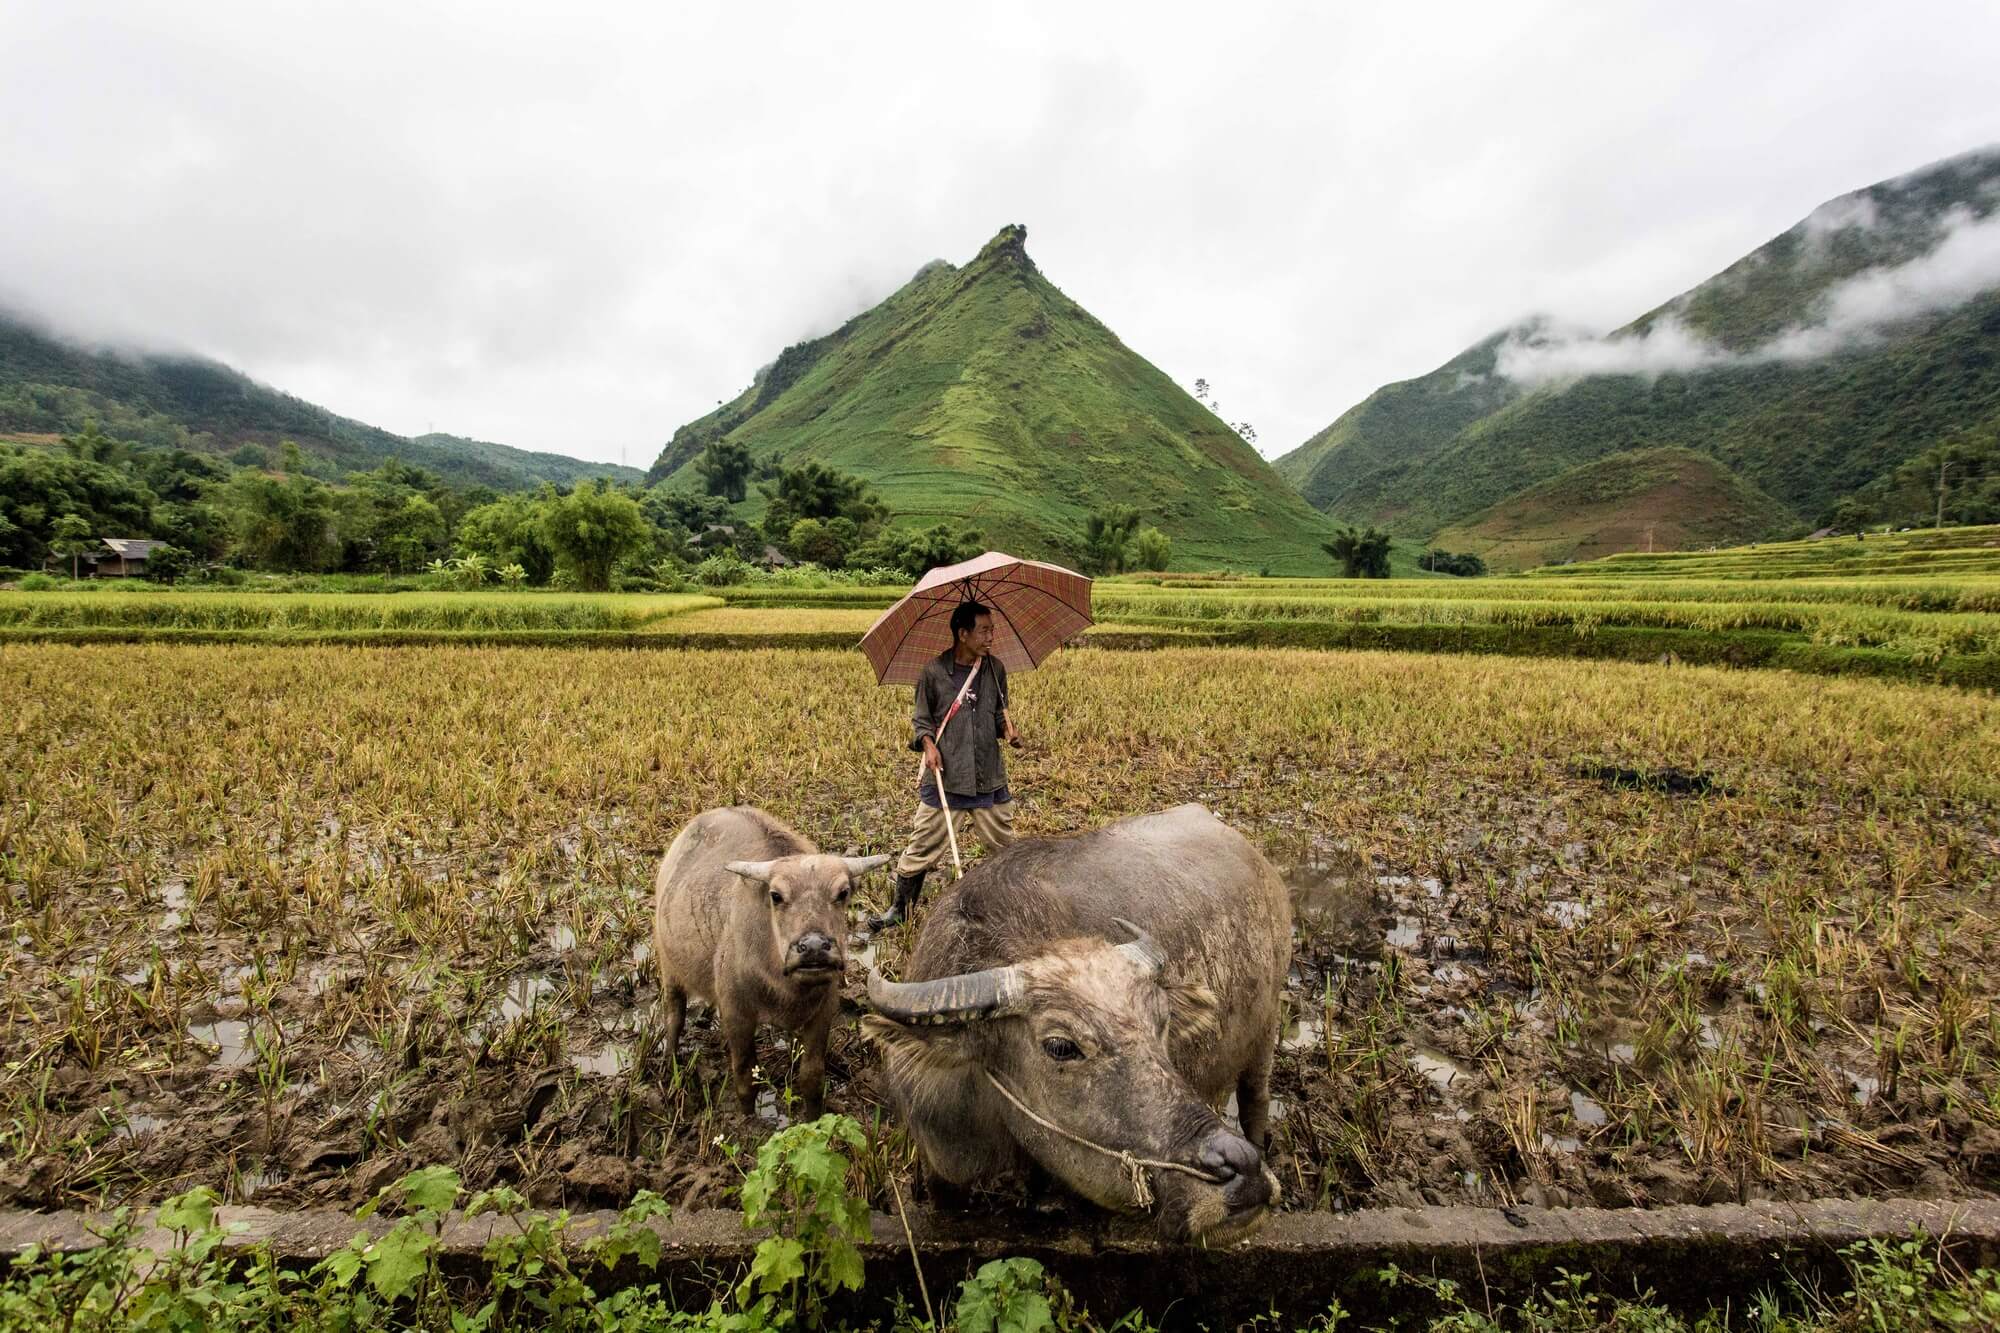 Vietnamese man with umbrella taking care of two buffaloes